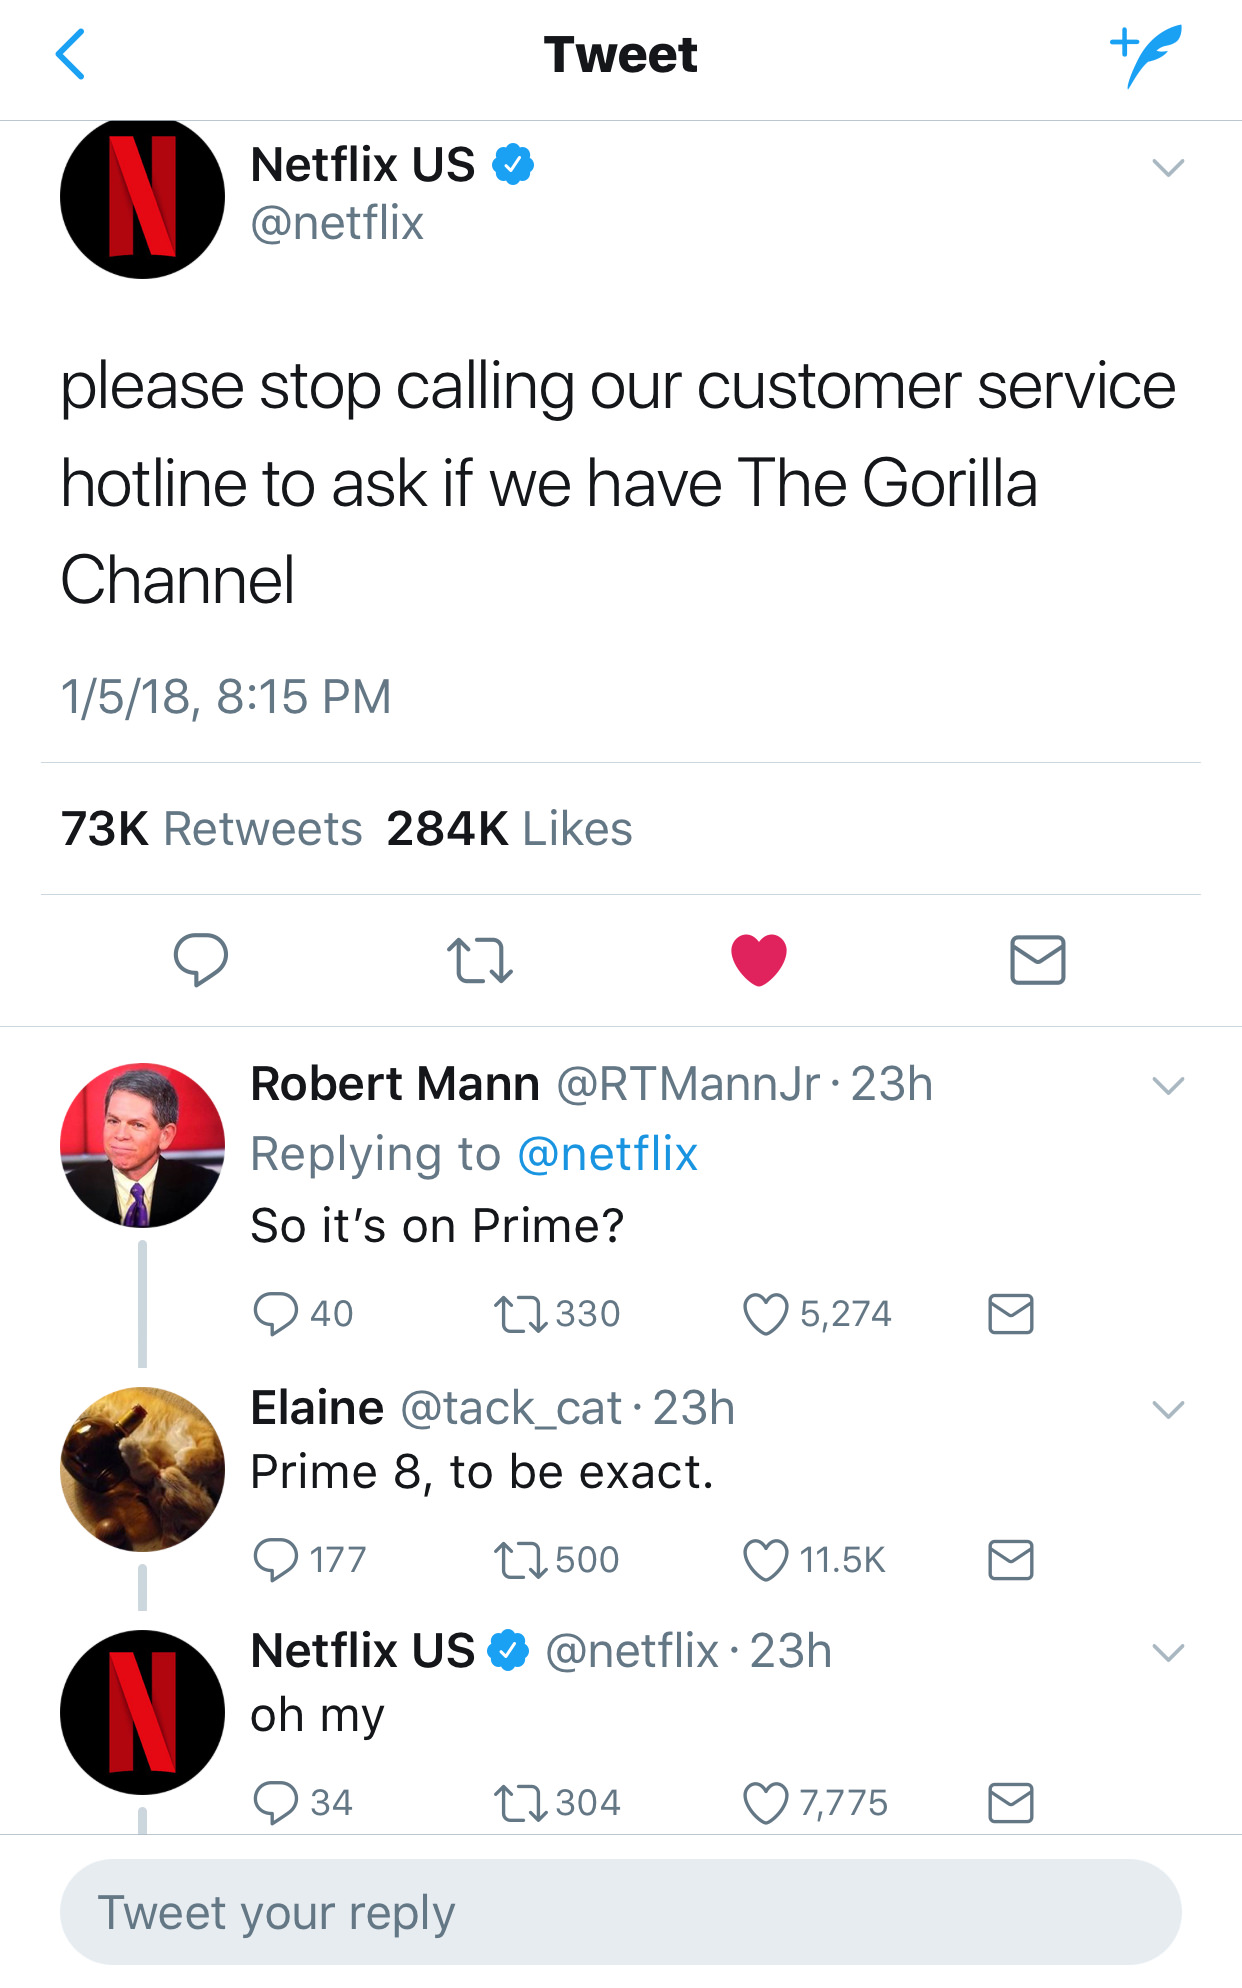 screenshot - Tweet Netflix Us please stop calling our customer service hotline to ask if we have The Gorilla Channel 1518, 73K 22 g Robert Mann . 23h So it's on Prime? 940 22330 5,274 0 9 Elaine 23h Prime 8, to be exact. Q177 1500 Q Netflix Us 23h oh my D